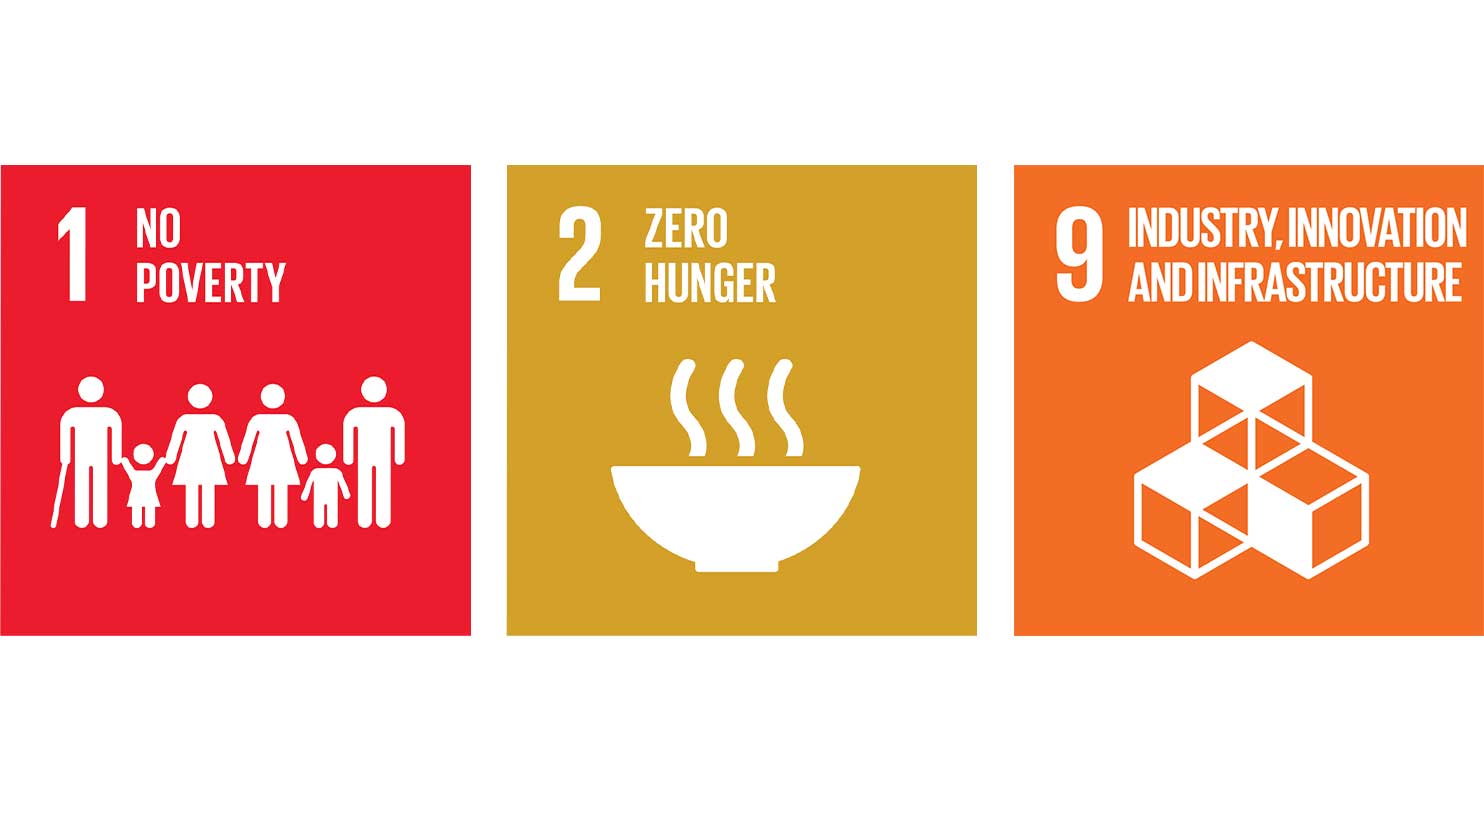 3-sdg-flying-food-study-burundi The three sustainable development goals used in the flying food study in Burundi: No Poverty, Zero Hunger and Industry, Innovation and Infrastructure